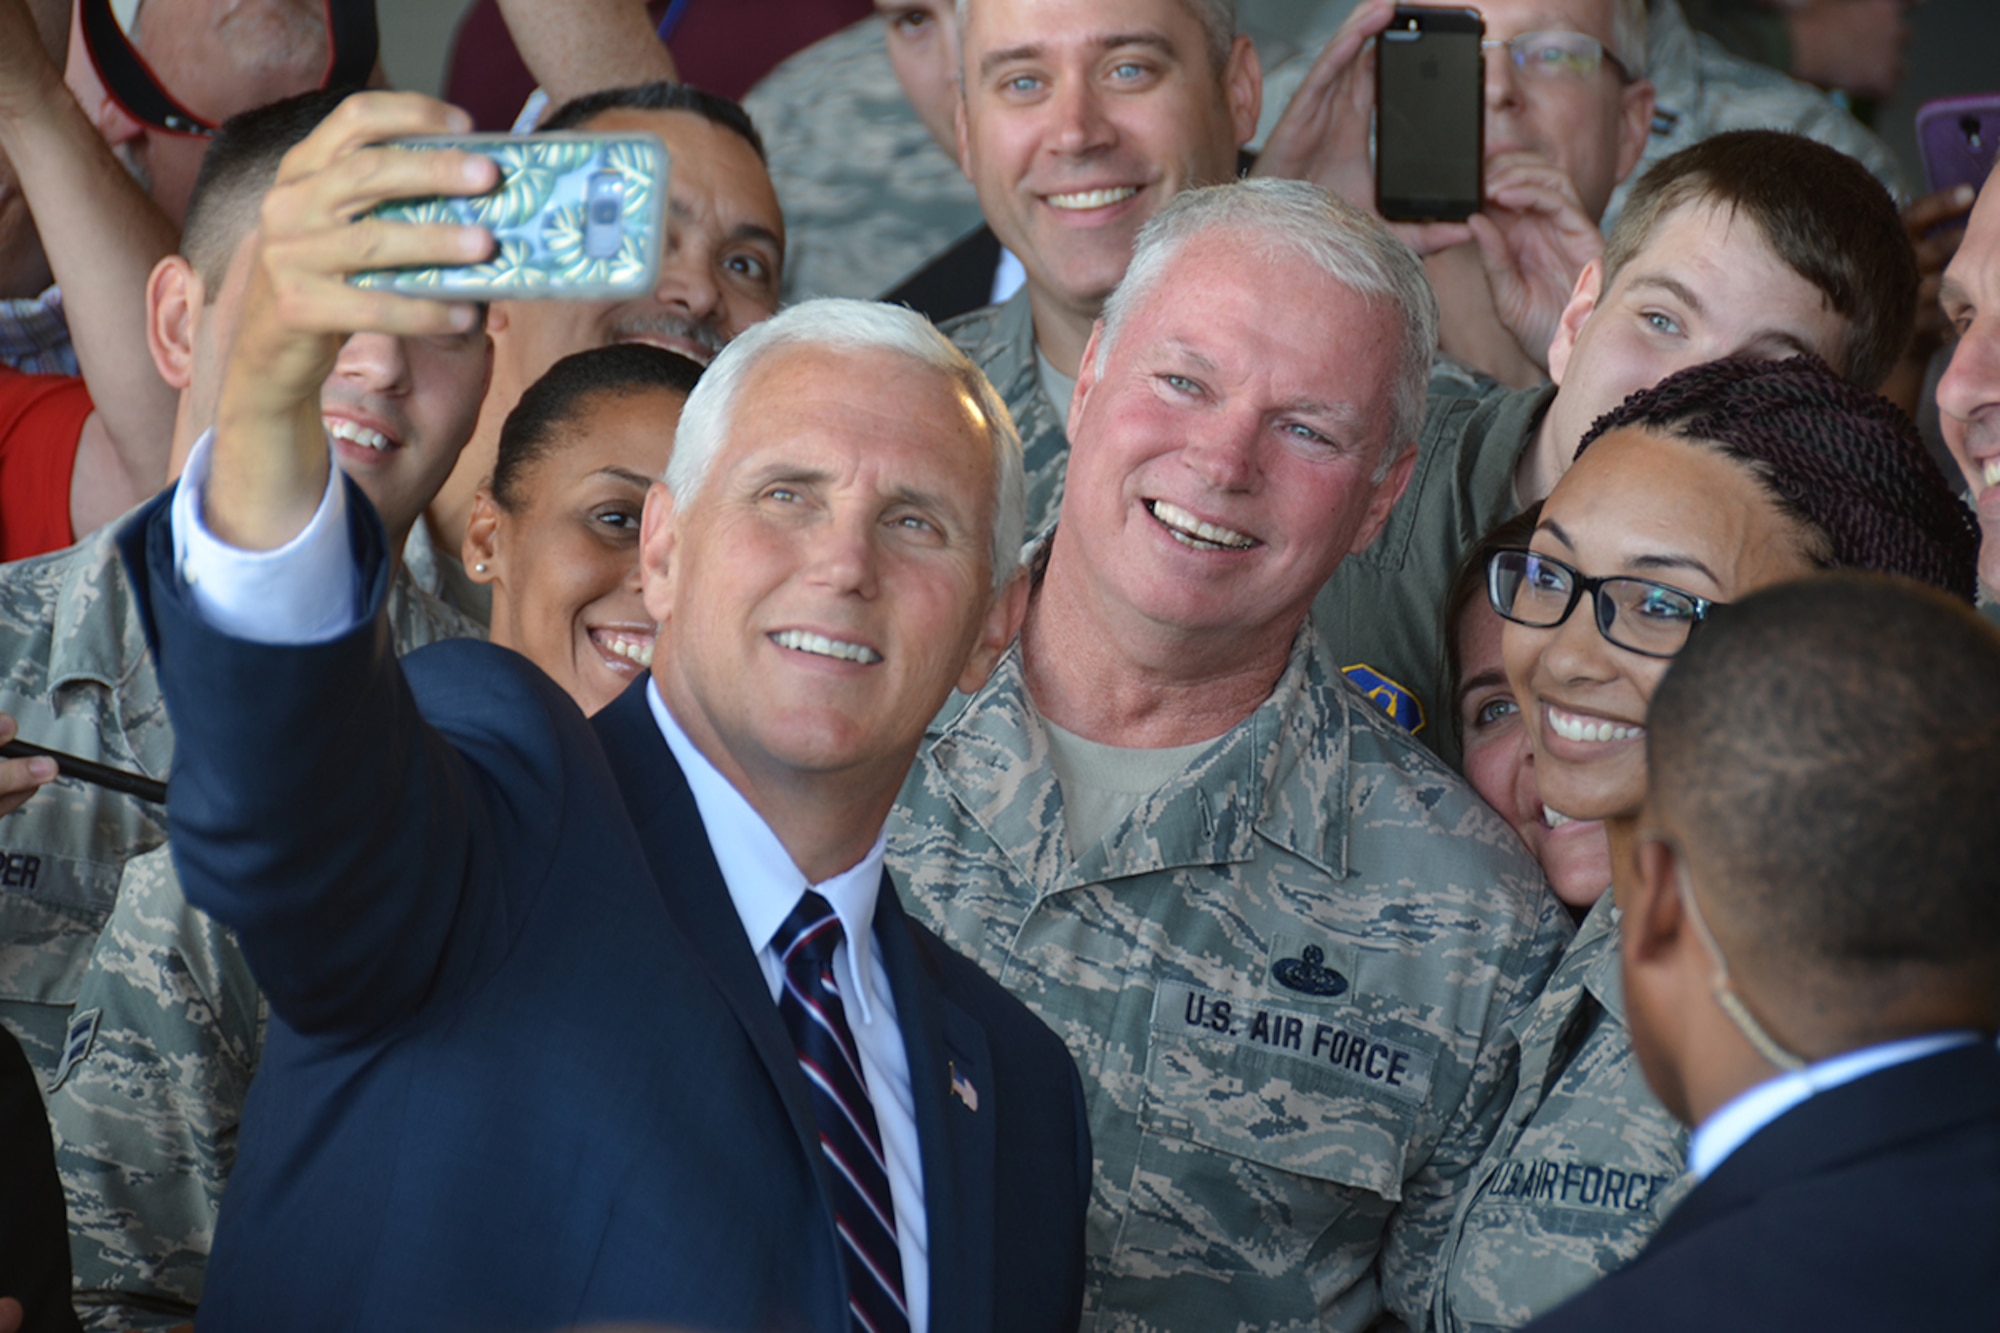 Vice President Mike Pence takes a selfie with military members during a visit to Dobbins Air Reserve Base, Georgia June 9, 2017. While recognizing it as the largest joint service training Reserve base in the world, Pence pledged the administration’s full support of our service members and national defense. (U.S. Air Force photo/Tech. Sgt. Kelly Goonan)